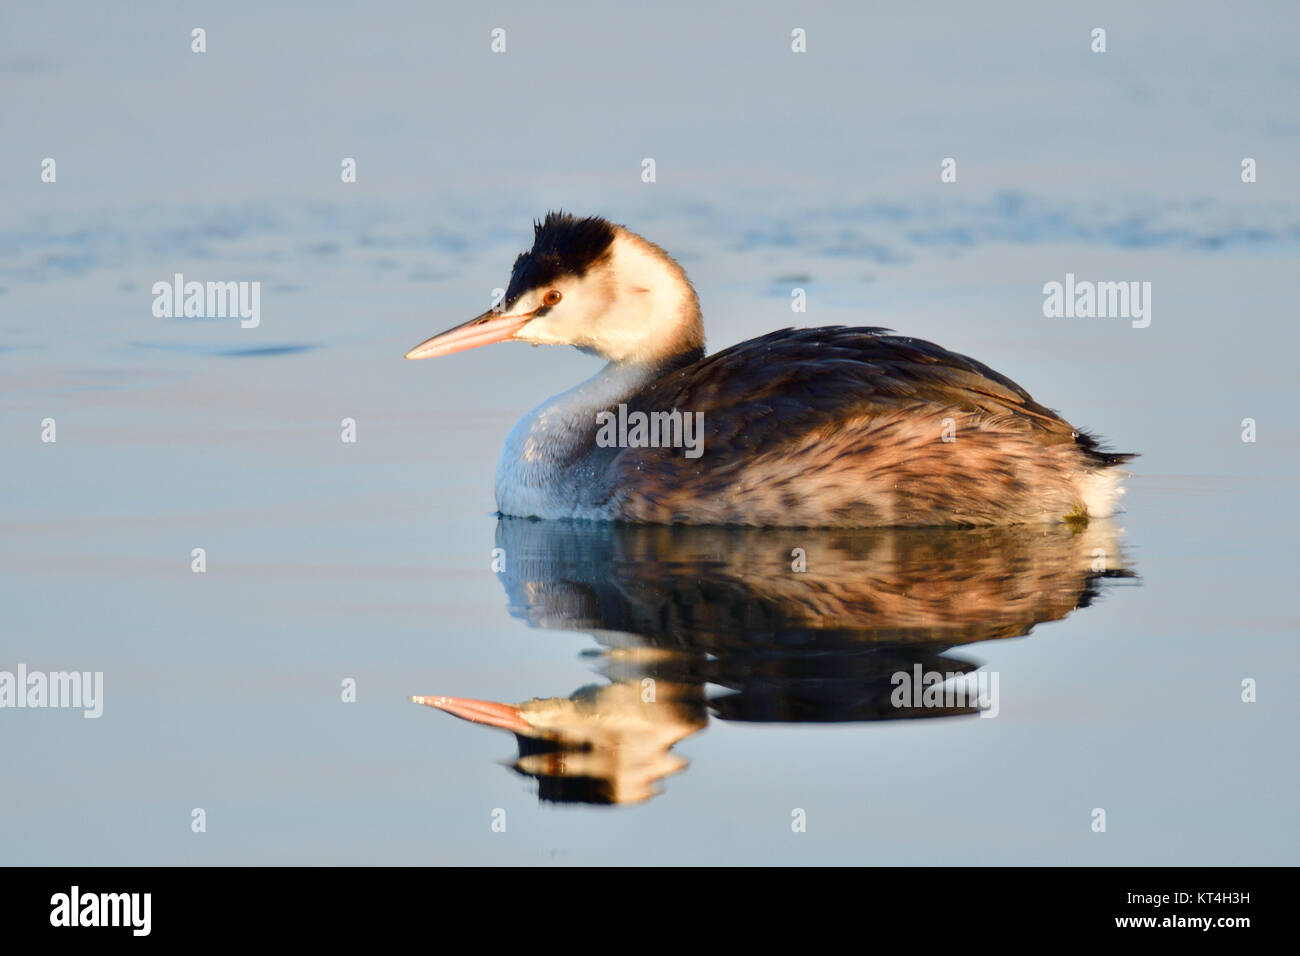 grebes in plumage Stock Photo